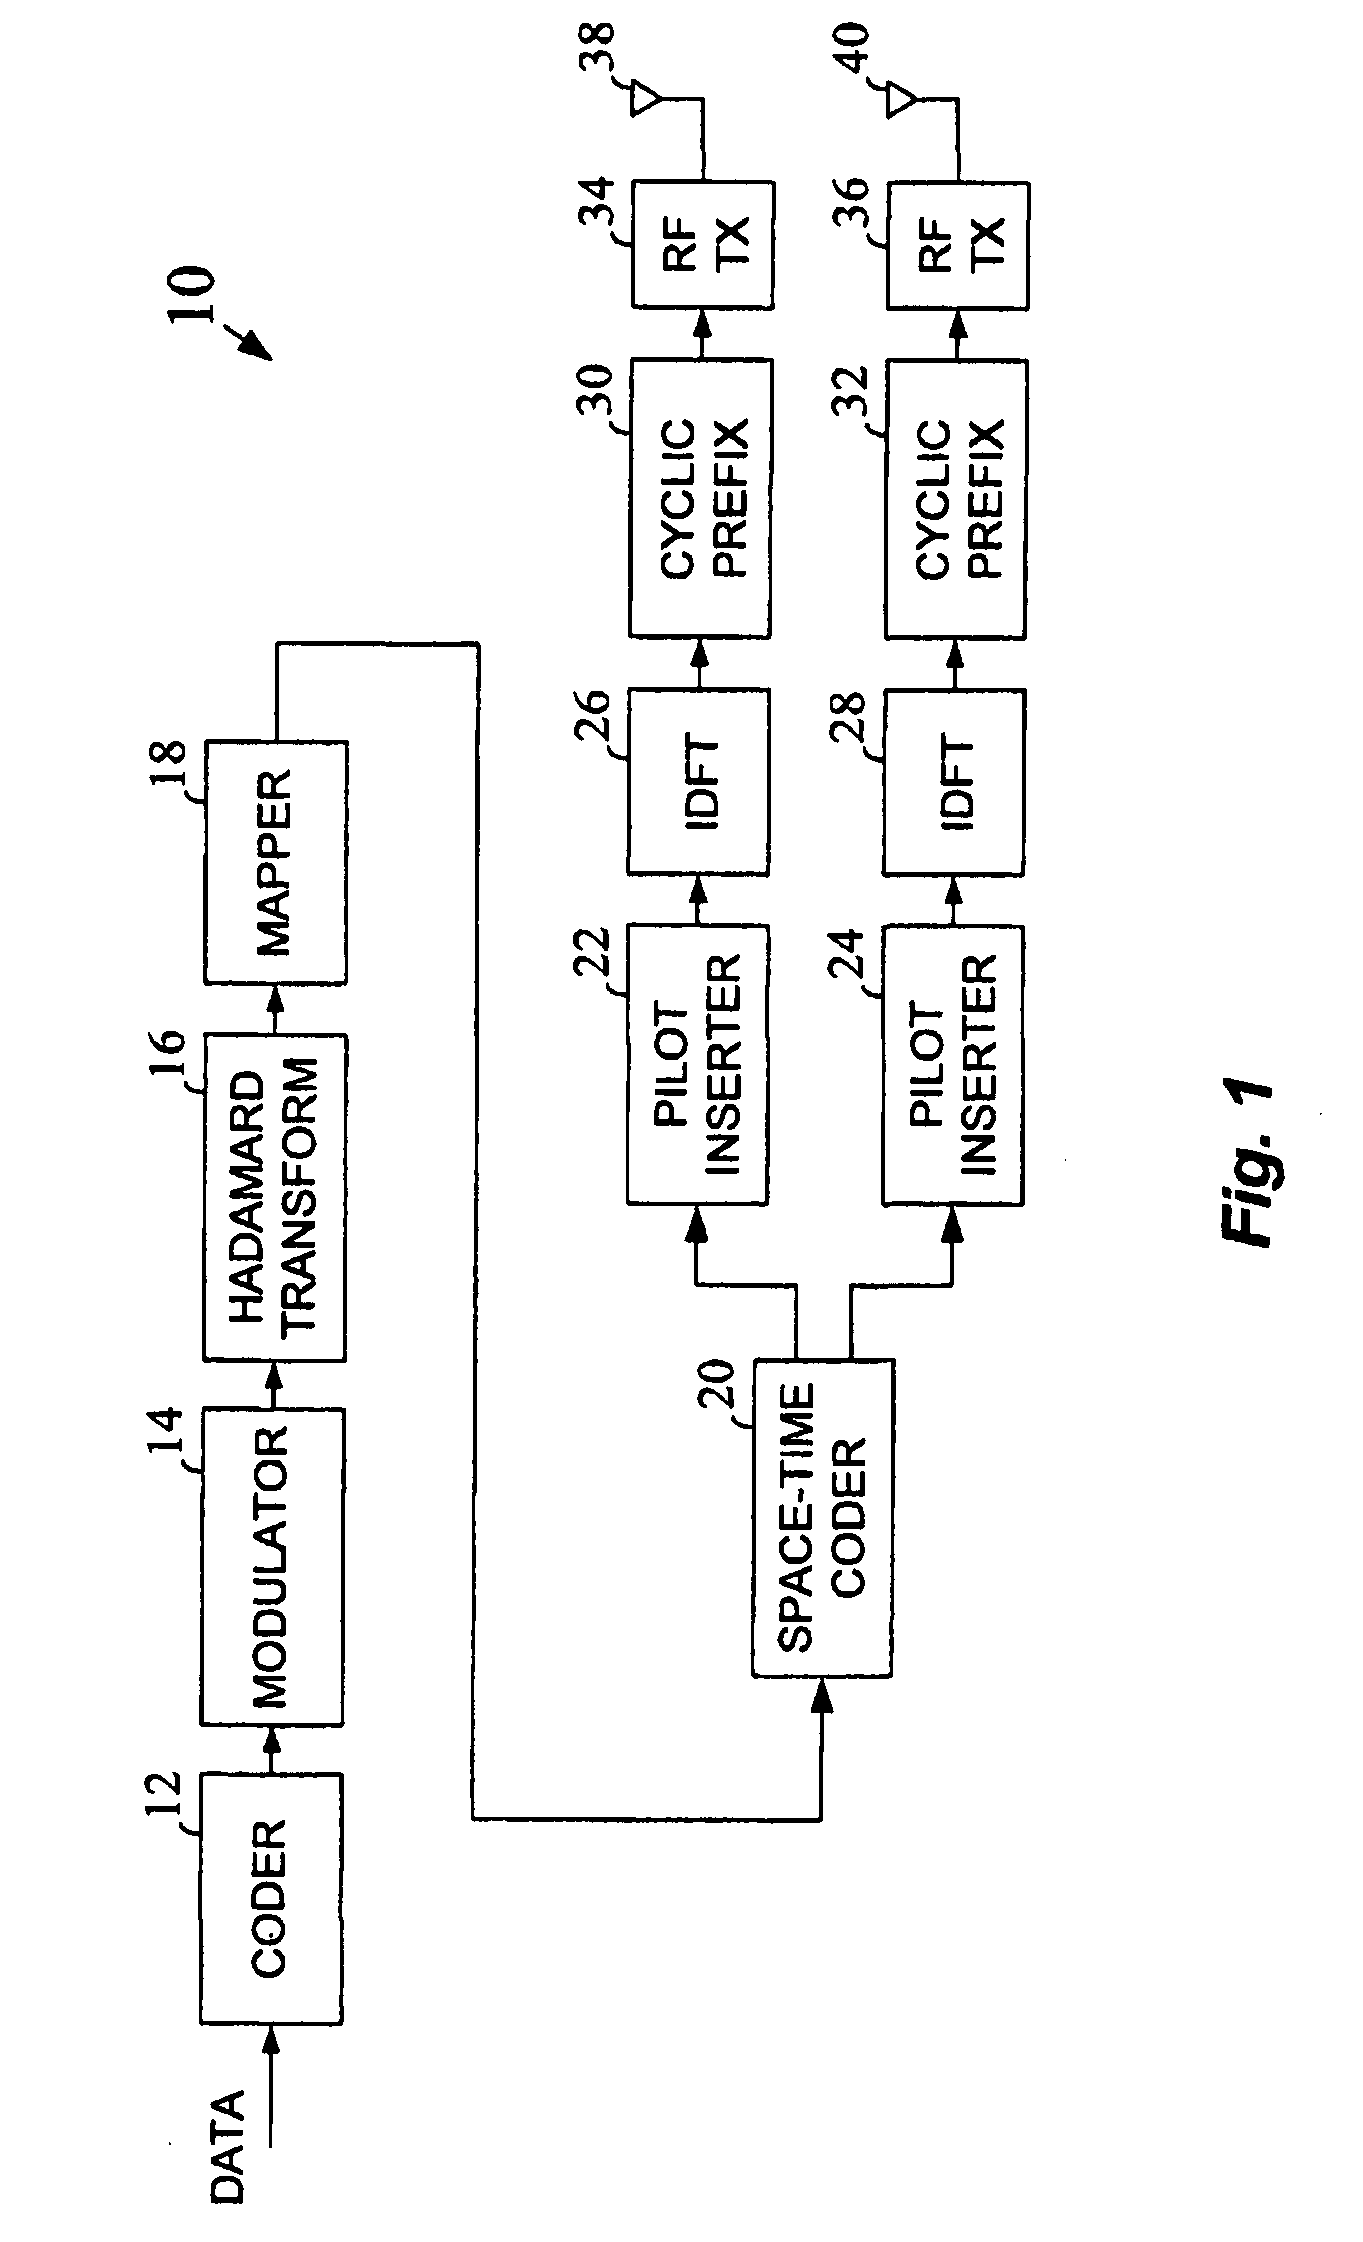 Method and Apparatus to Improve Performance in a Multicarrier Mimo Channel Using the Hadamard Transform